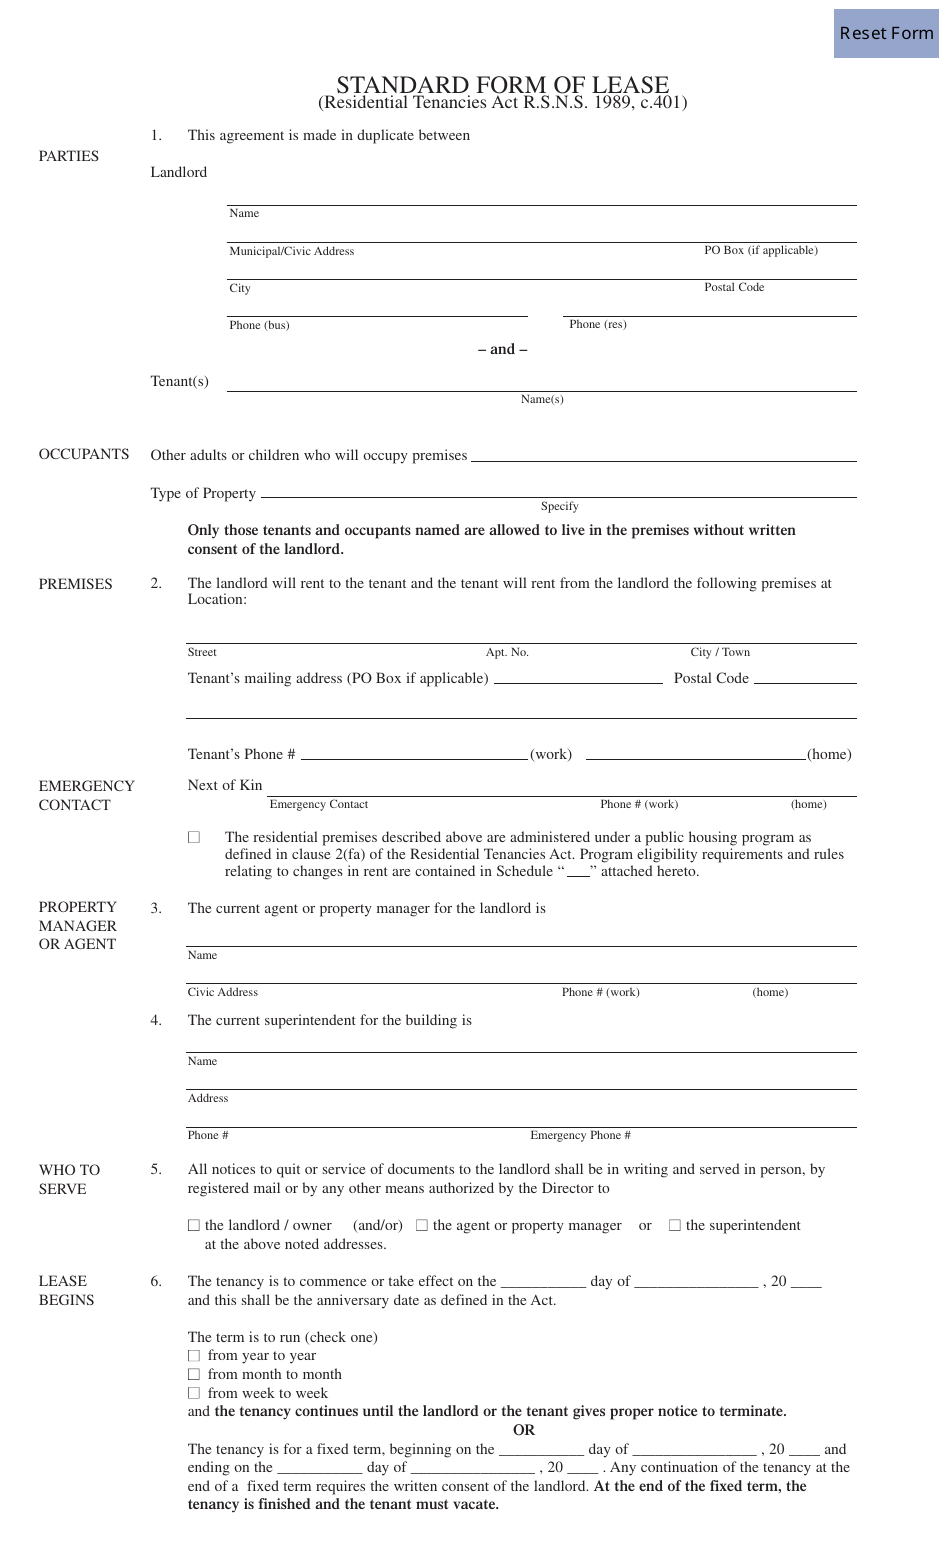 Standard Form of Lease, Page 1